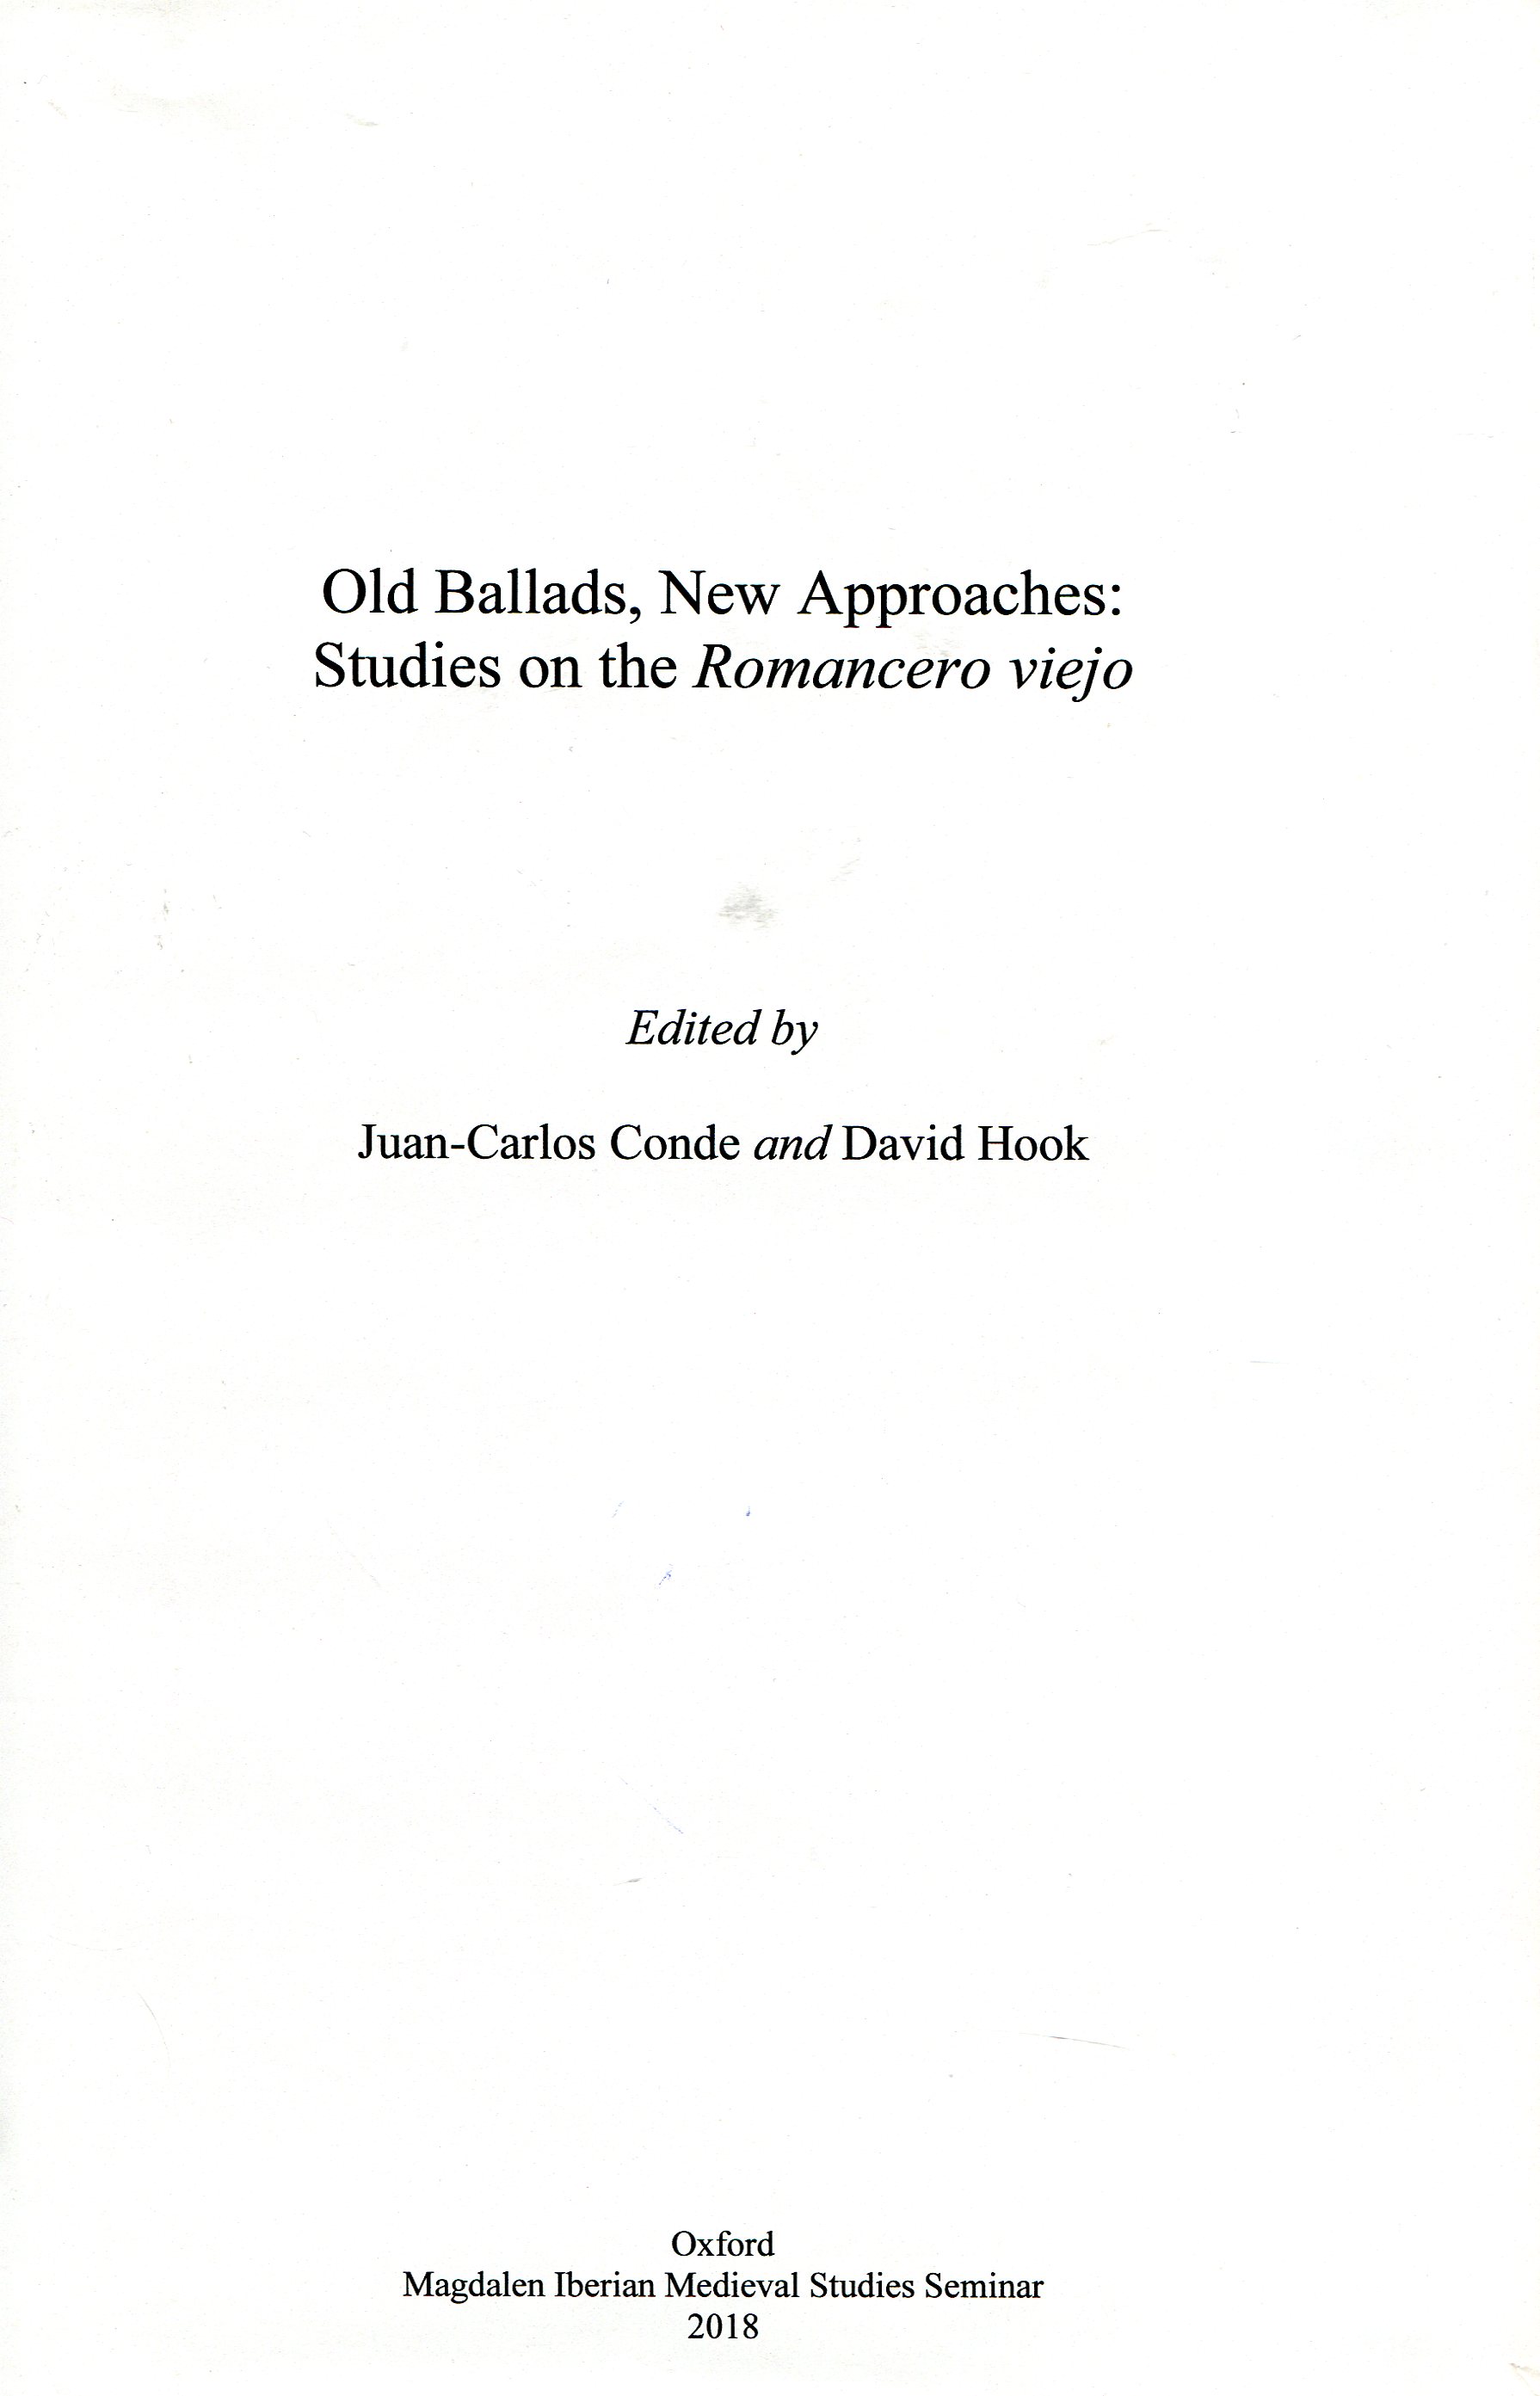 Old Ballads, new approaches